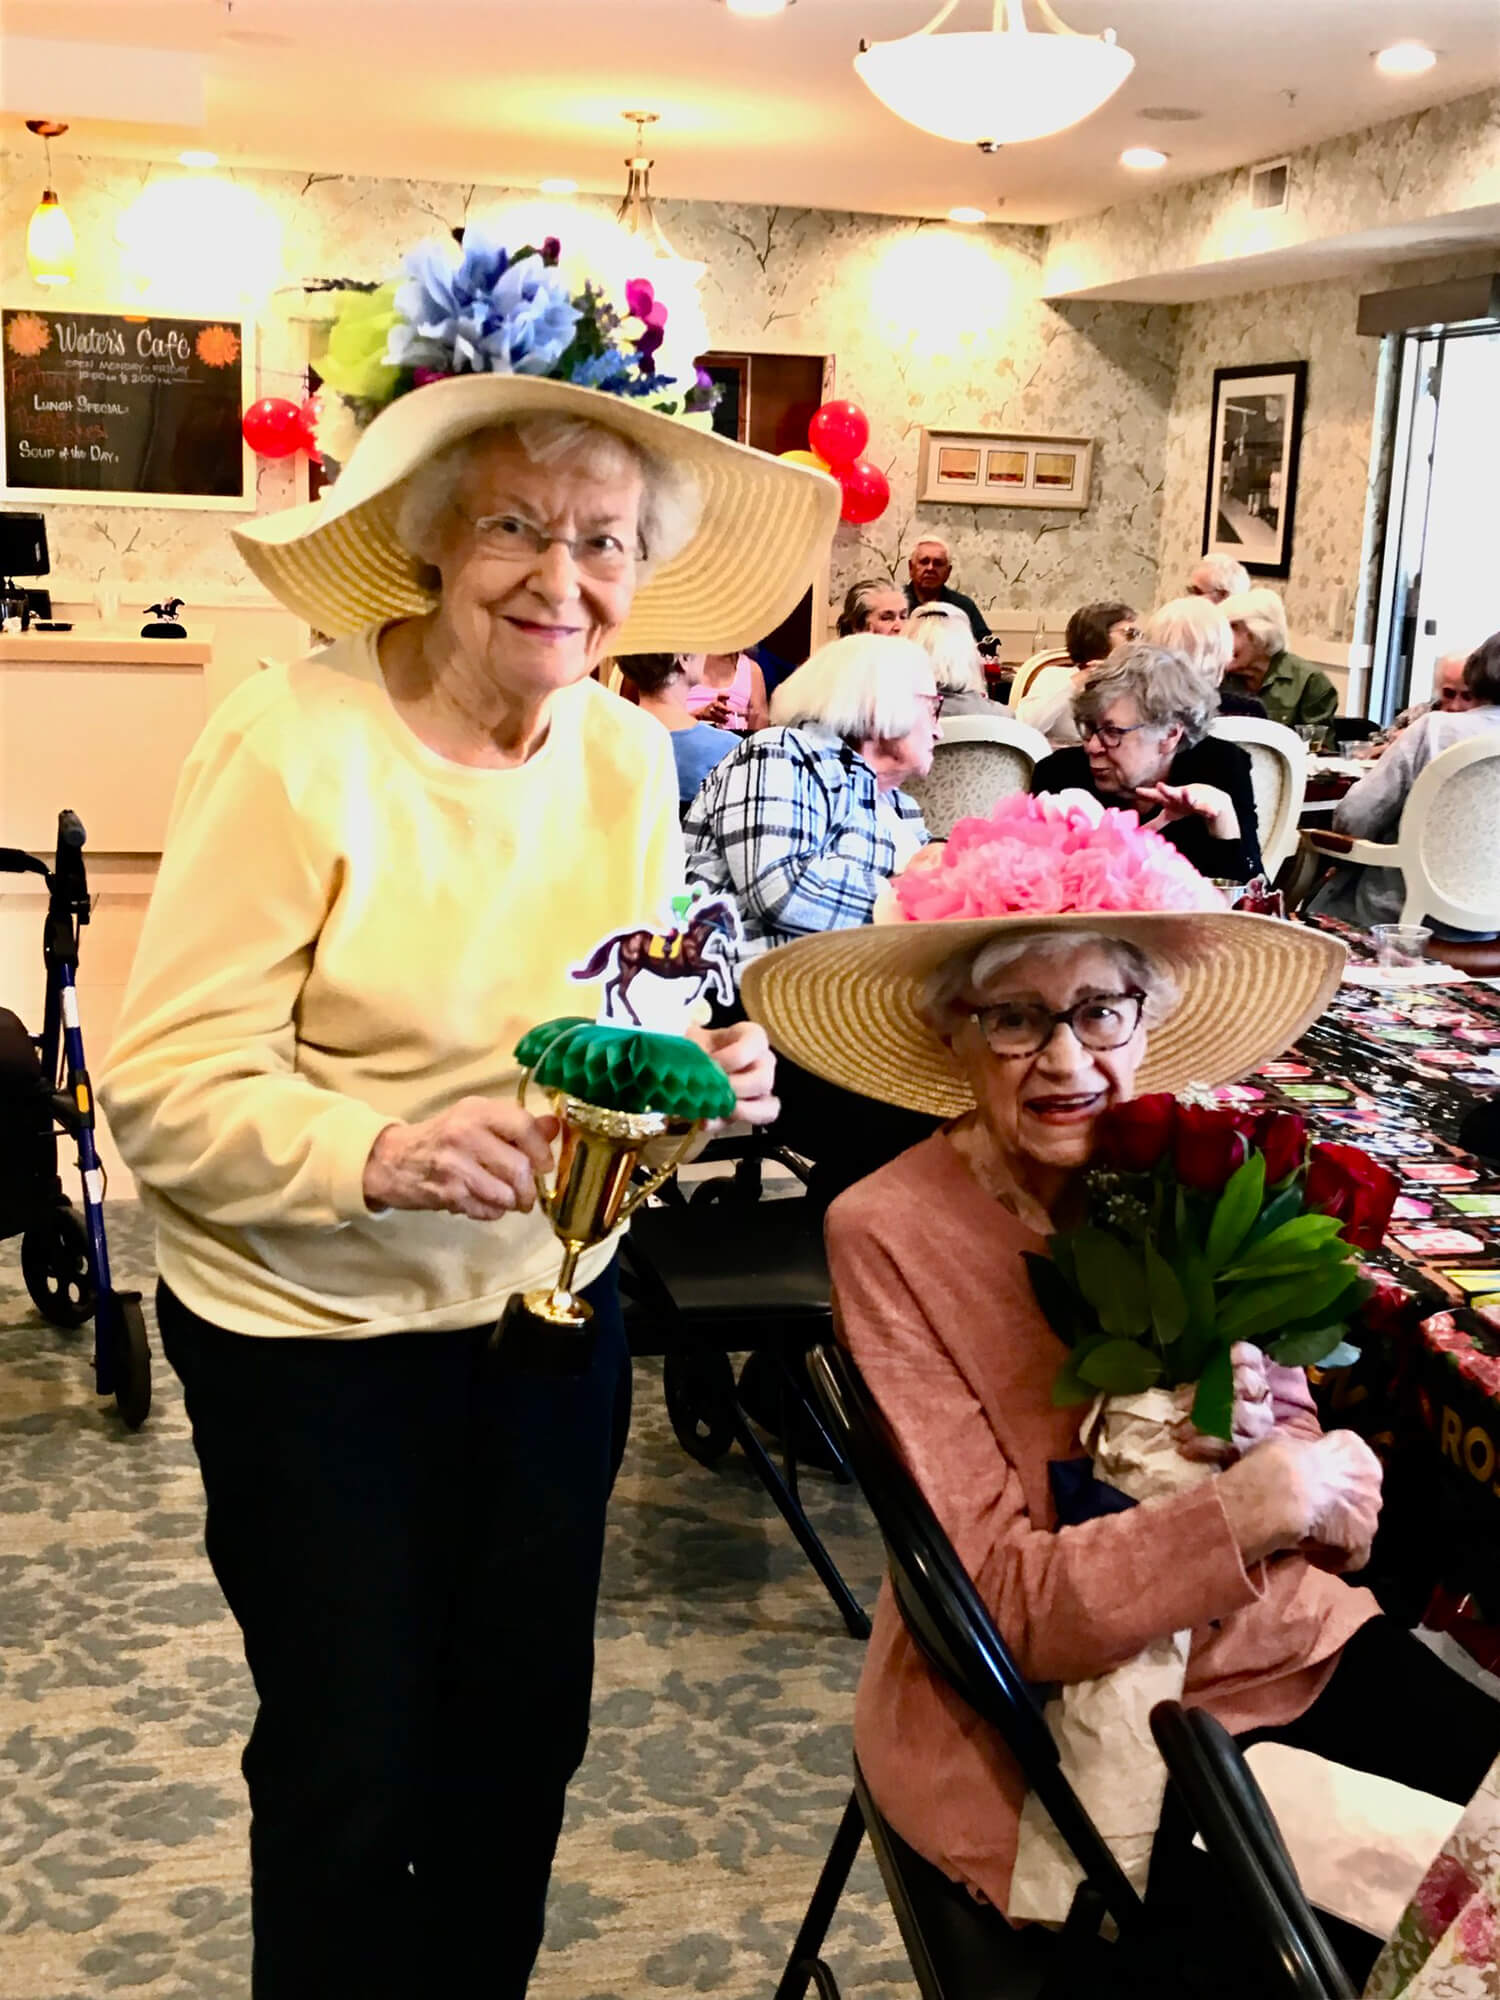 Two senior ladies wearing decorative hats with flowers and ribbons celebrate Derby Day, one holding a trophy and the other a bouquet of roses.